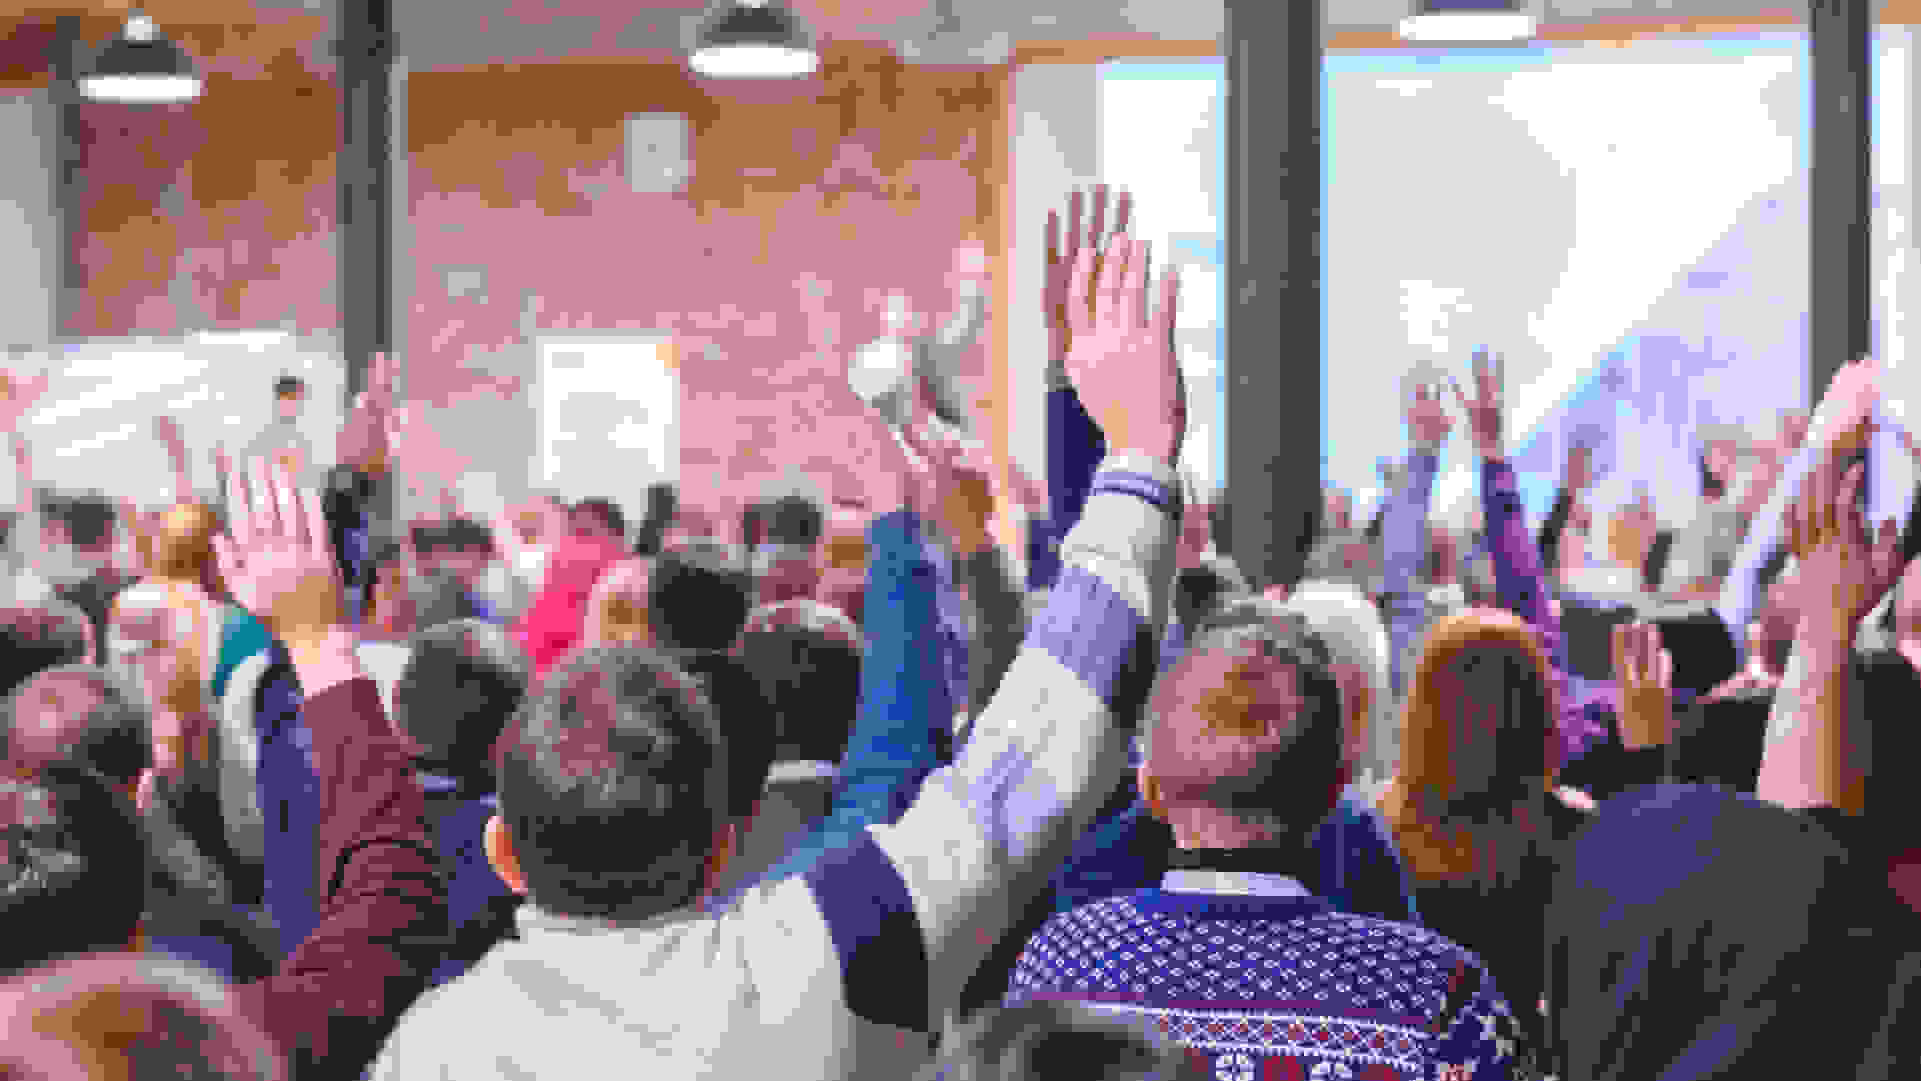 School pupils in an assembly with their hands up